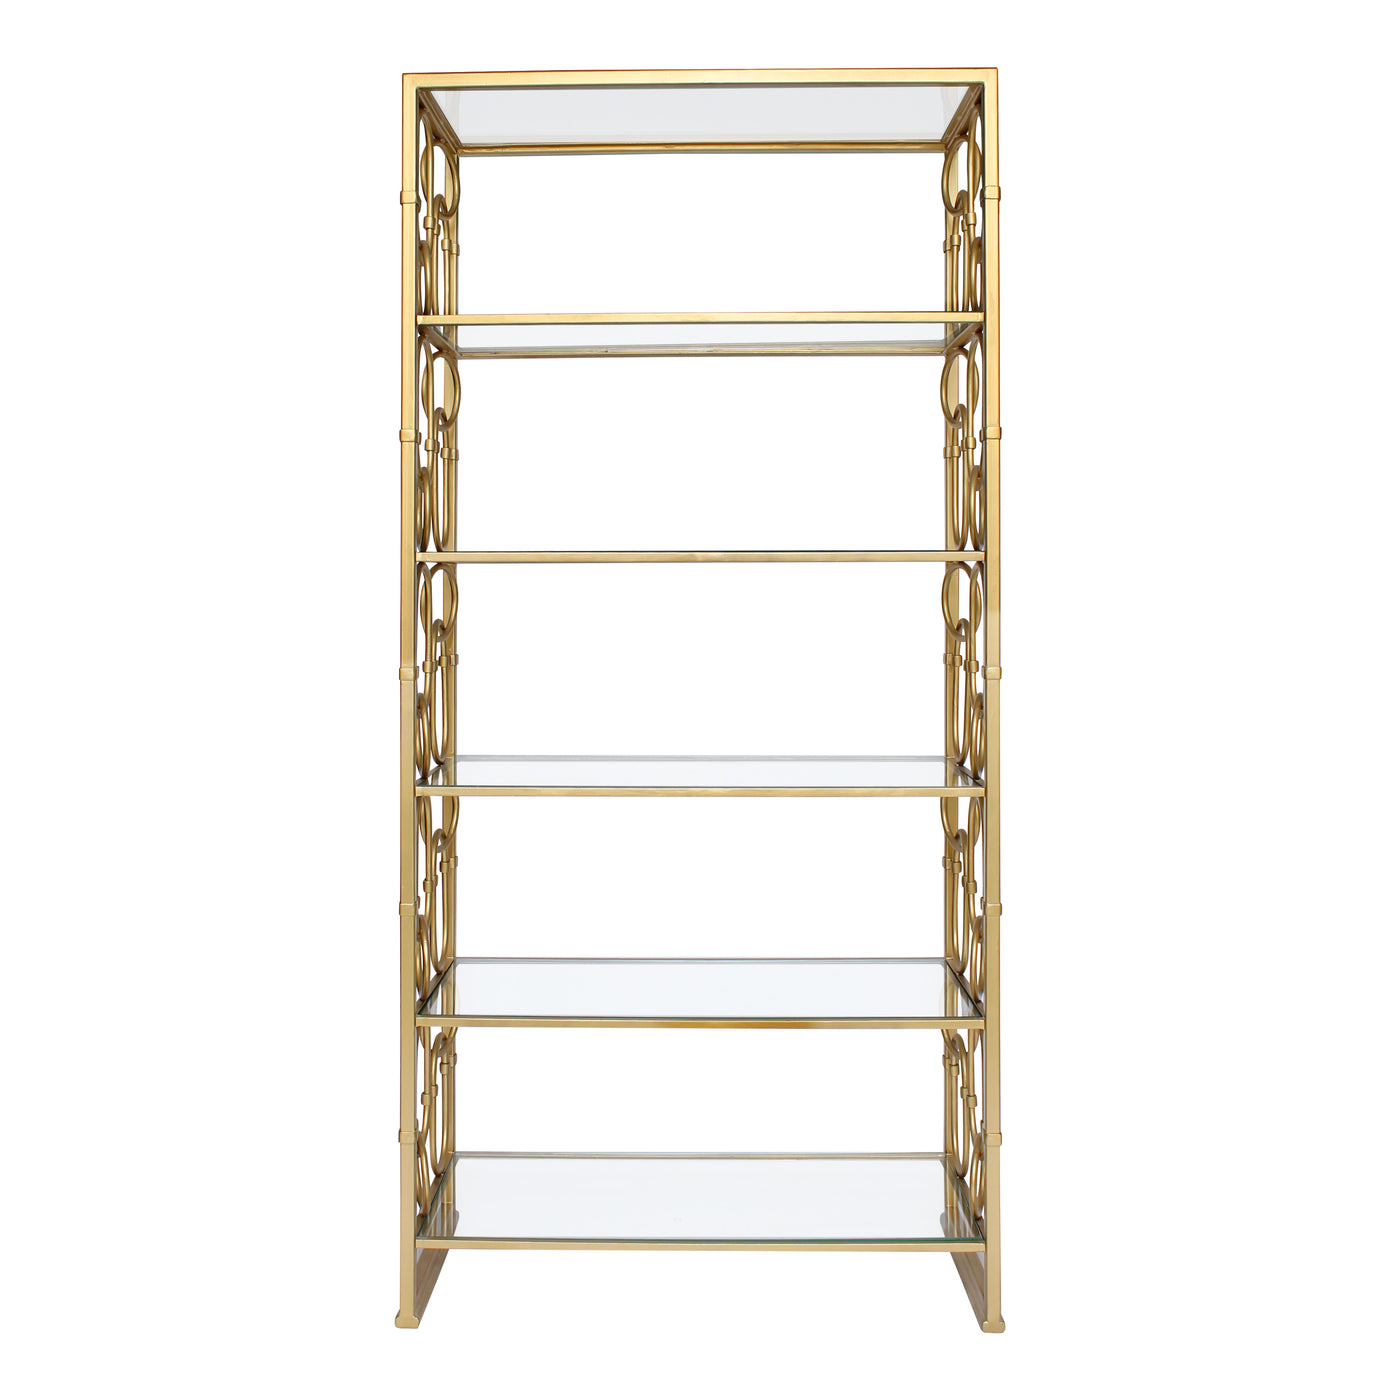 A wrought iron decorative bookcase with six glass shelves painted in a luxurious gold painted finish